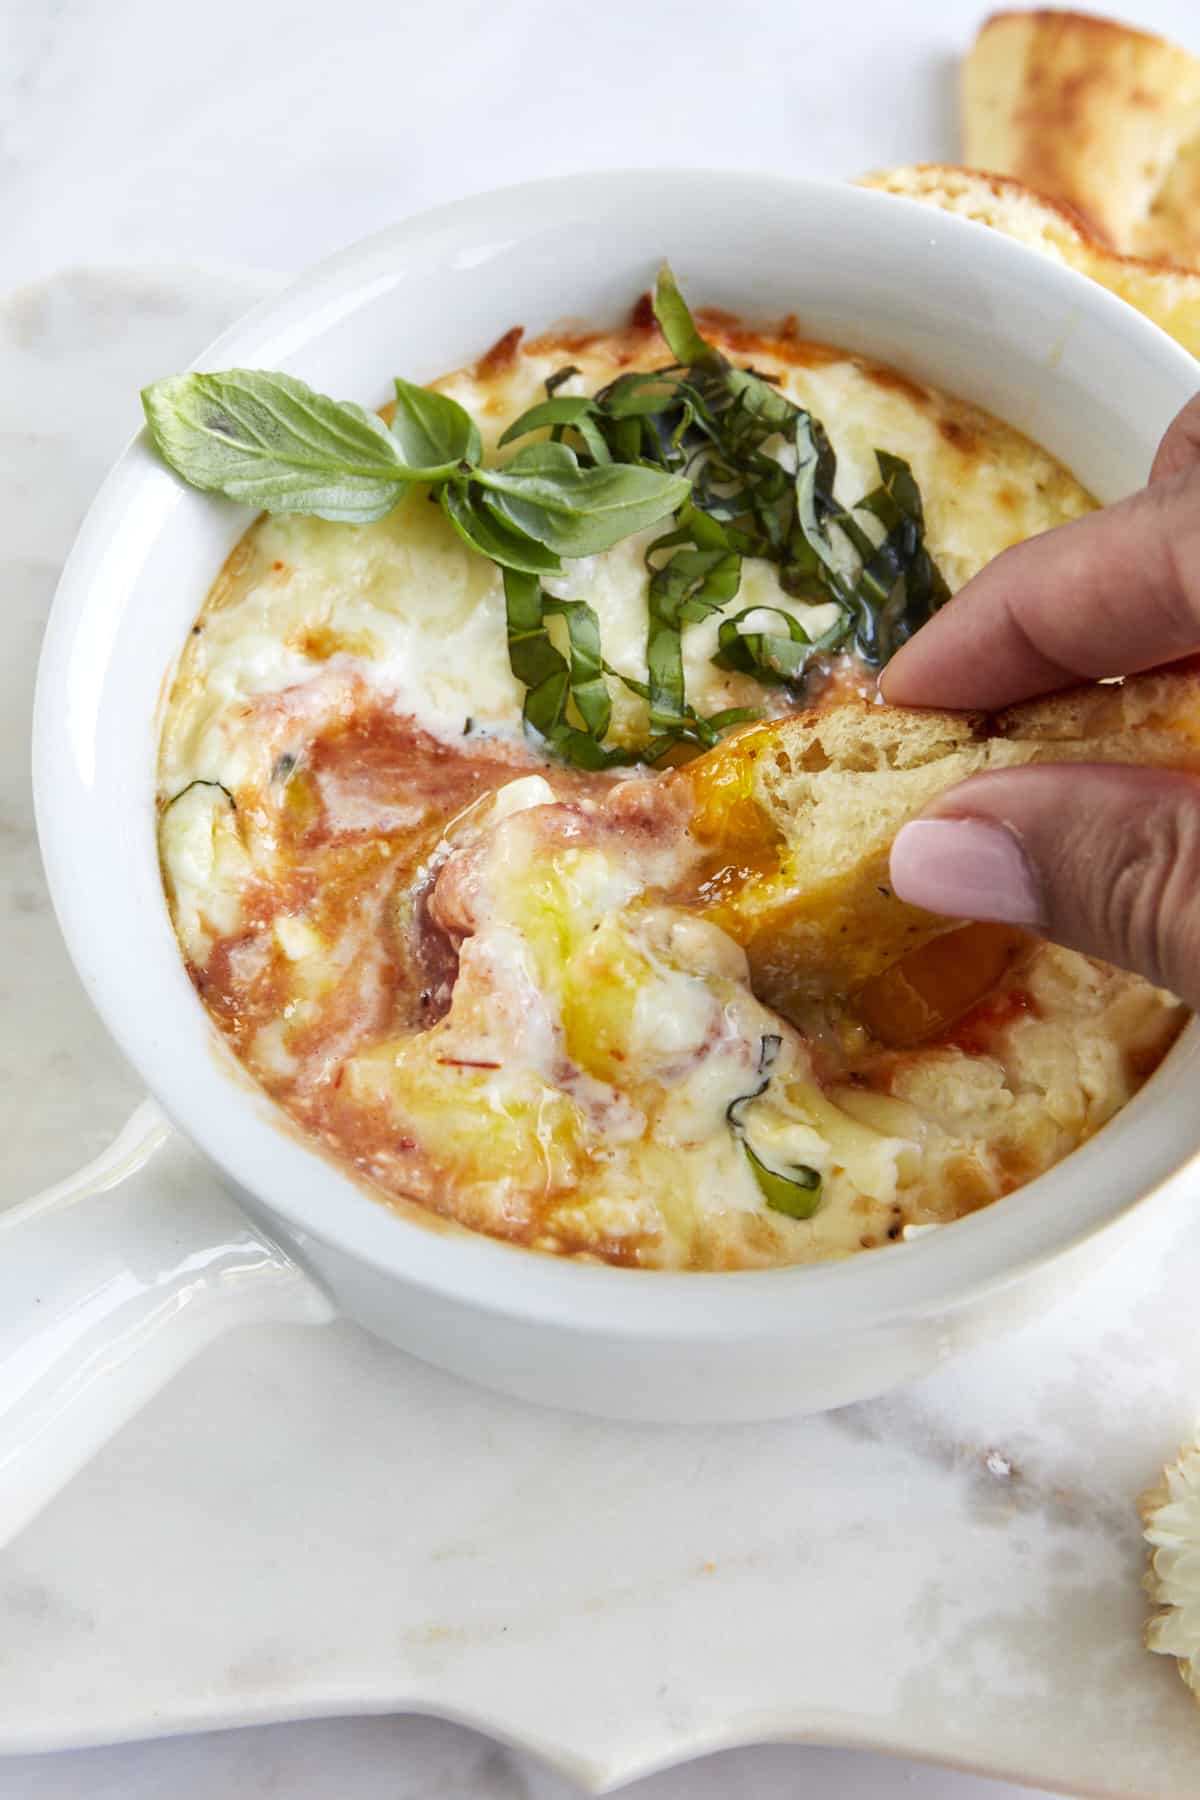 Two fingers dipping a piece of bread into a ramekin full of Eggs in Purgatory. 